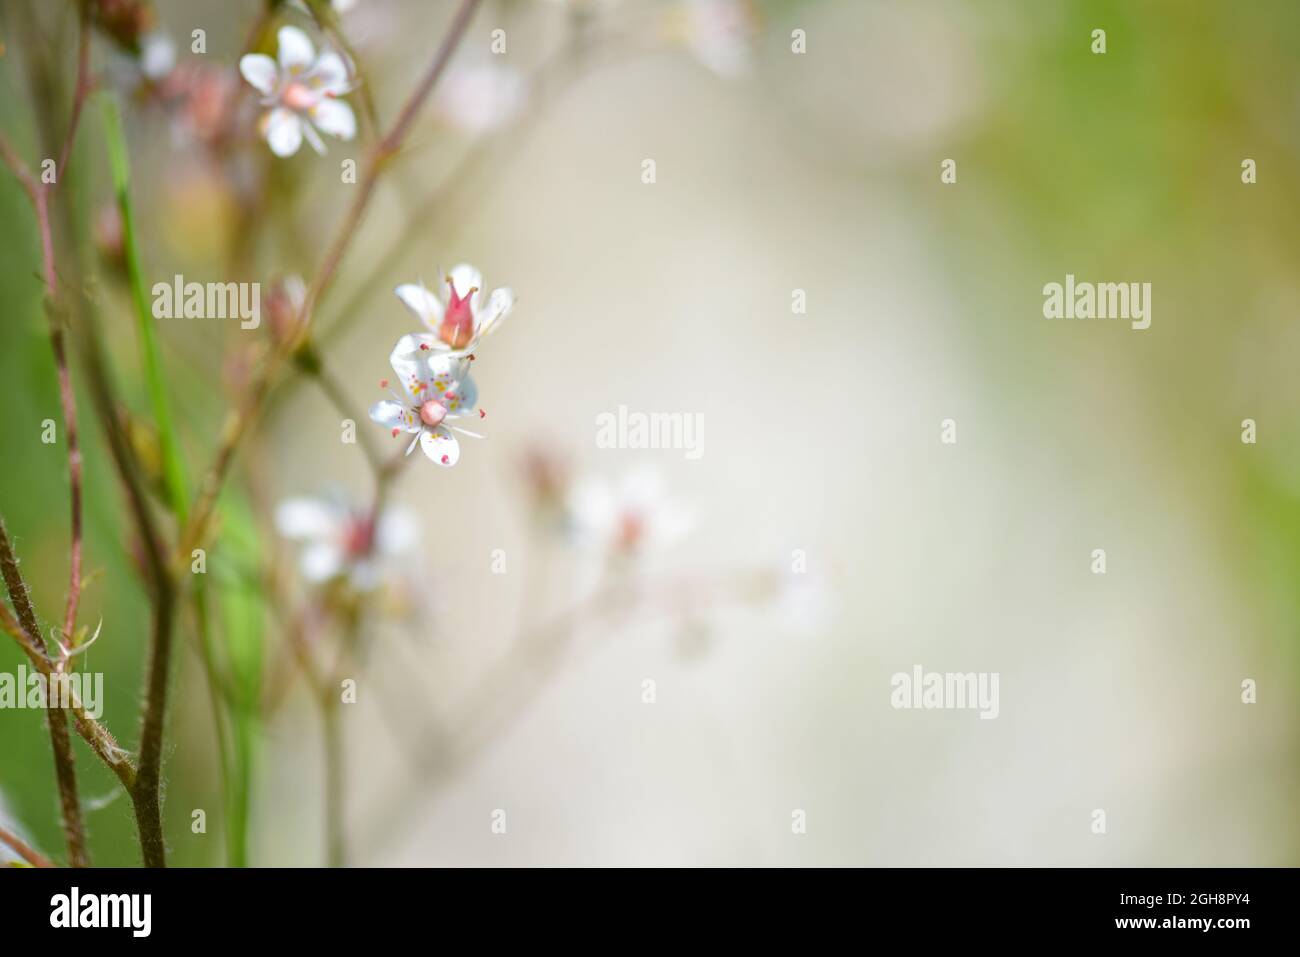 Flowers background. Flowers Saxifraga closeup on natural background. Soft focus Stock Photo